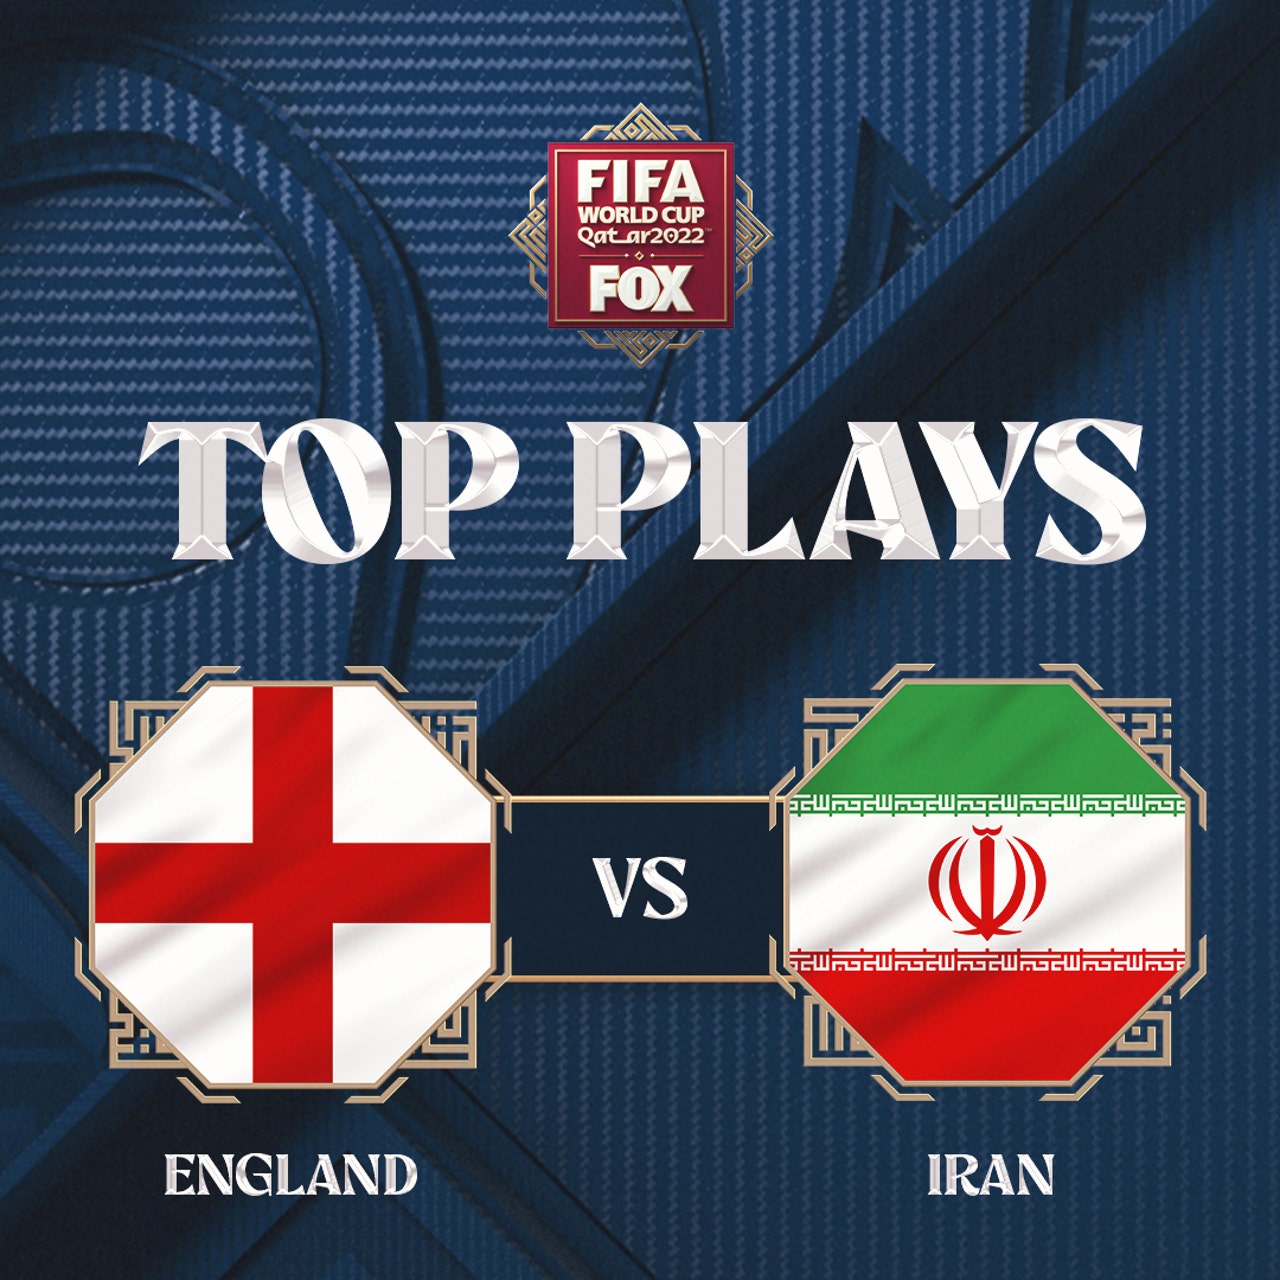 World Cup 2022 top plays England routs Iran, 6-2 FOX Sports